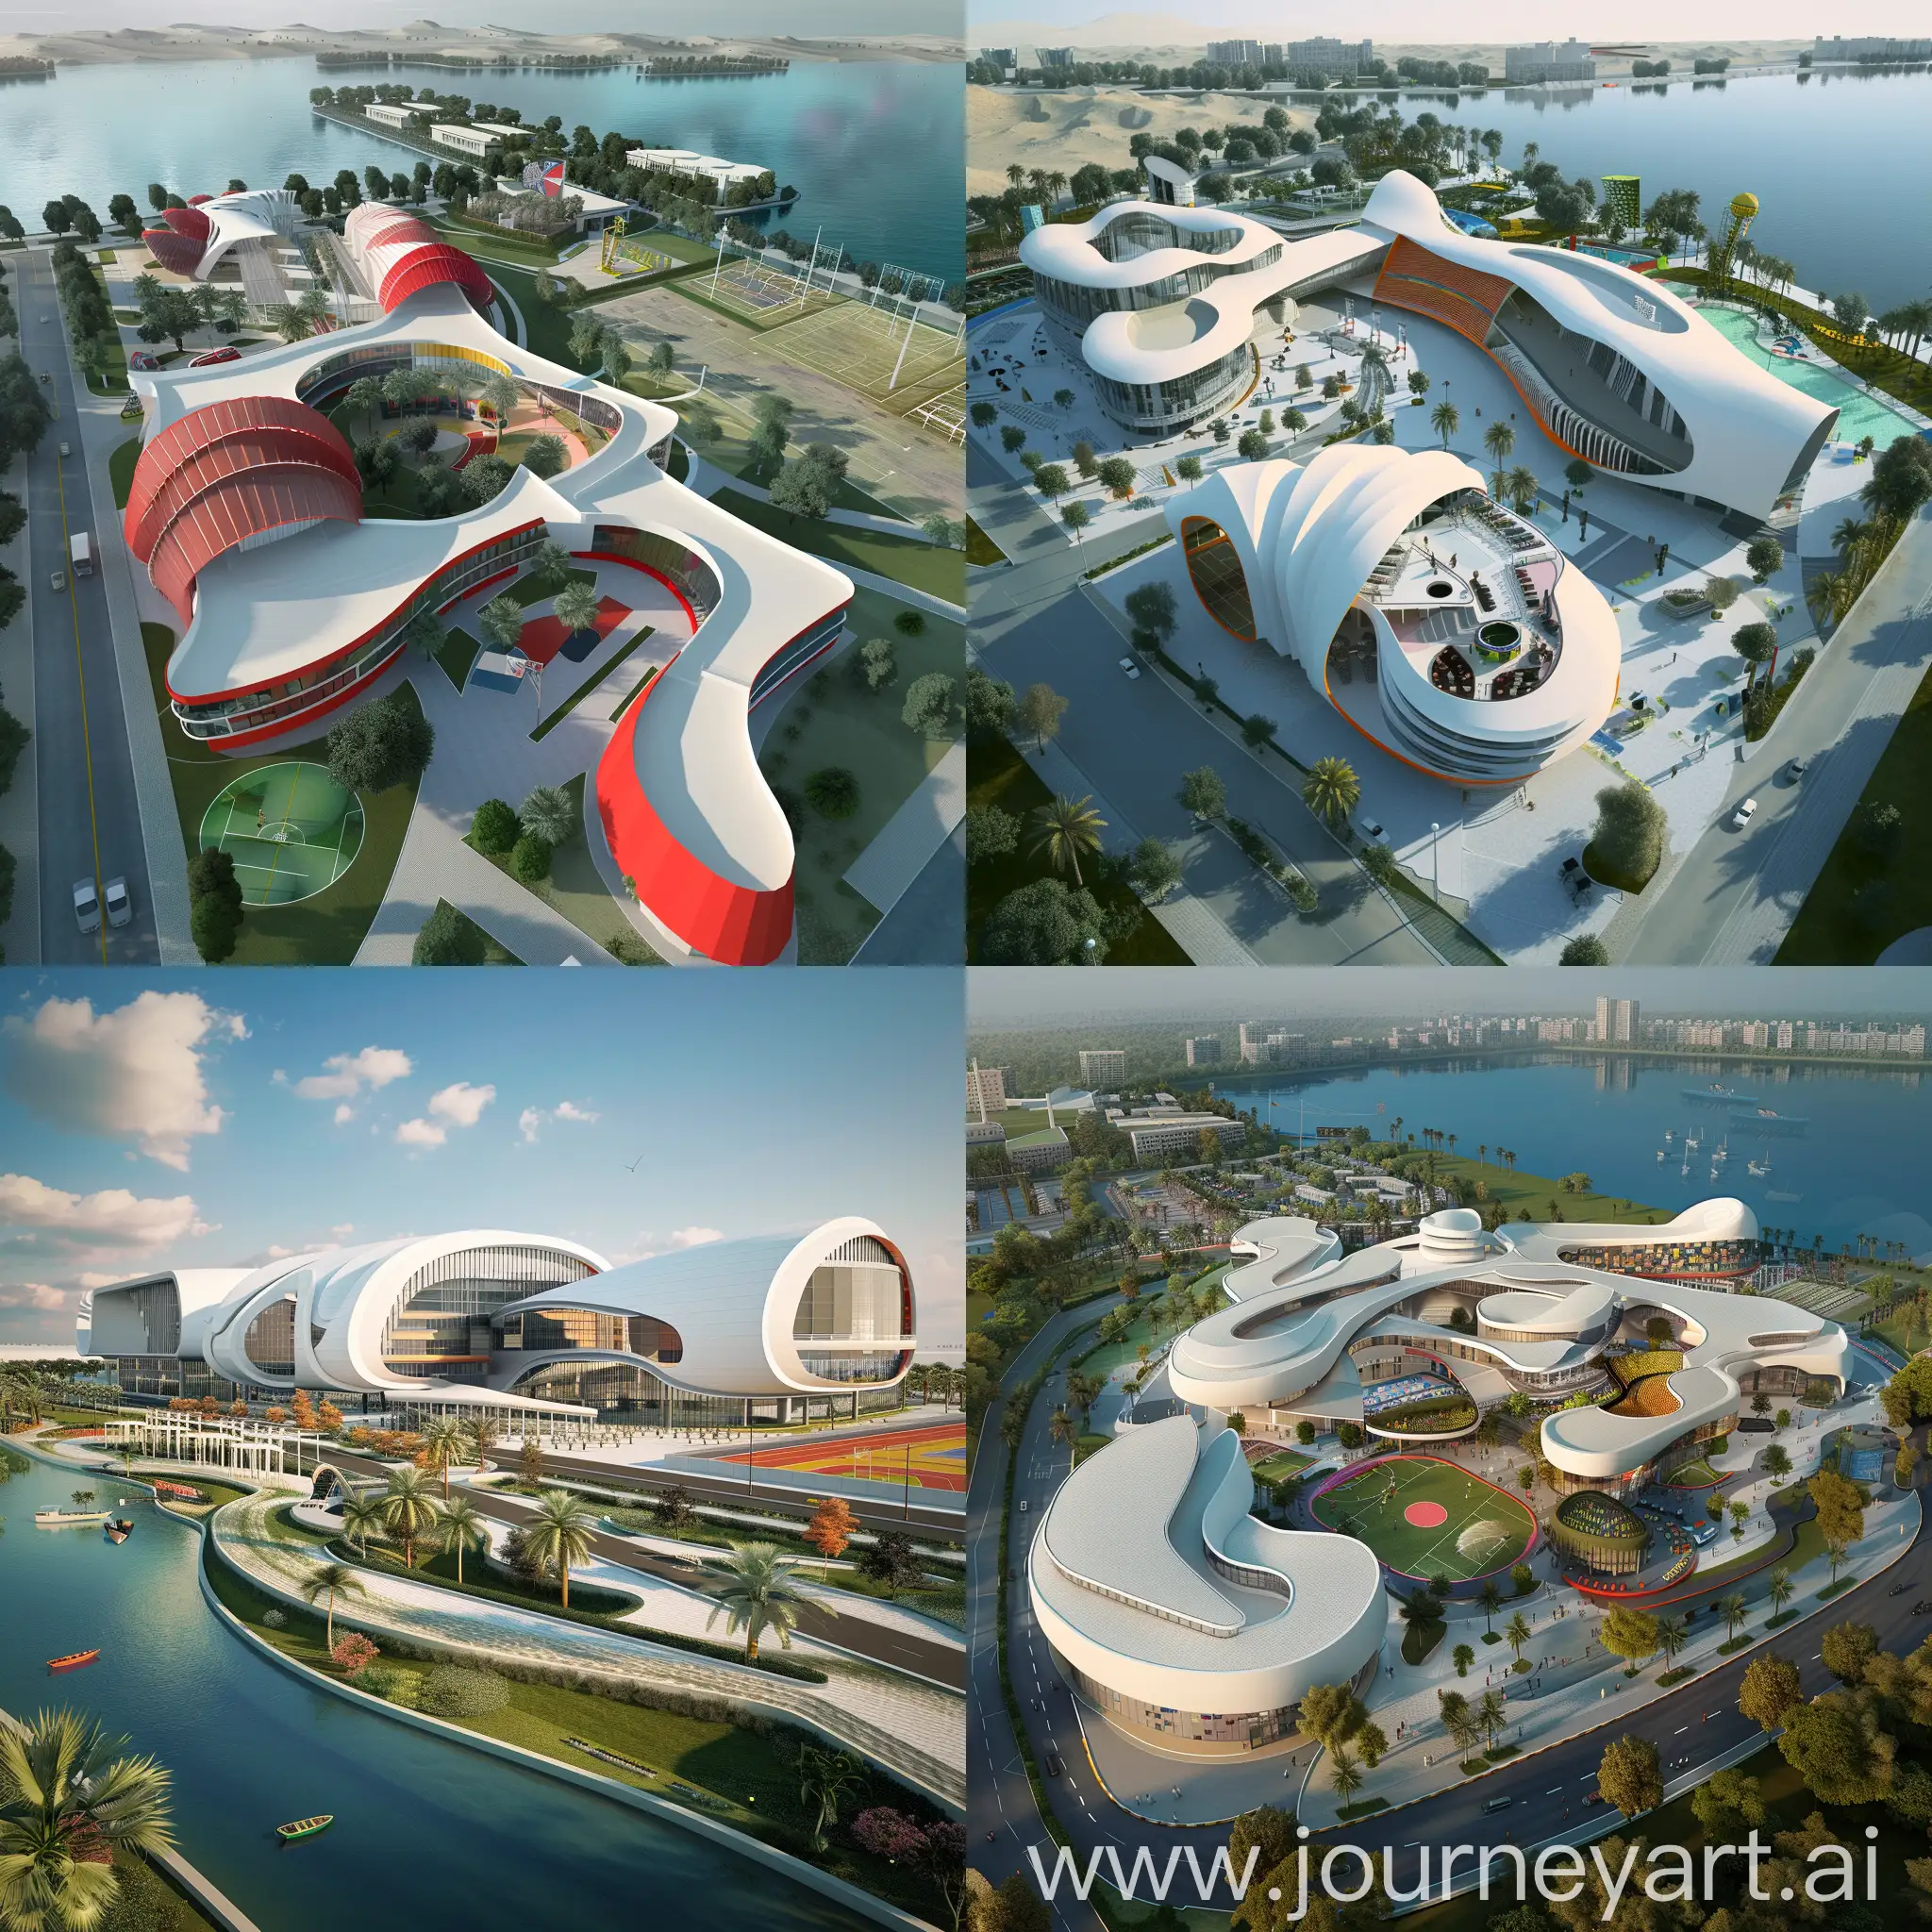 i want you to generate accurate and visually appealing 3D masses images for this architectural graduation project. "Designing a sports center complex in New Alamien City, Egypt, the site boasts a picturesque lake view from the north and is prominently positioned along the main road from the south. The key components of the project include a main hall for basketball, handball, and other sports, a smaller hall for diverse activities, a vibrant food court, an outdoor court for archery with spectator seating, a compact administrative zone, a unique Soccer Beach, a hanged Olympic swimming pool designed to be extraordinary, a small rehabilitation area, and retail stores offering sports-related souvenirs and equipment. The design inspiration is derived from the organic compounds of hormones released during physical exertion, namely Adrenaline, Noradrenaline, Cortisol, and Testosterone. The resulting architectural form embodies the dynamic movement of athletes, featuring abstracted curves. Adrenaline influences varying height levels, Cortisol results in smoother building surfaces, and Testosterone manifests as competitive buildings trying to surpass one another. The overall style aspires to be smart and iconic, capturing the essence of the project's unique inspiration."